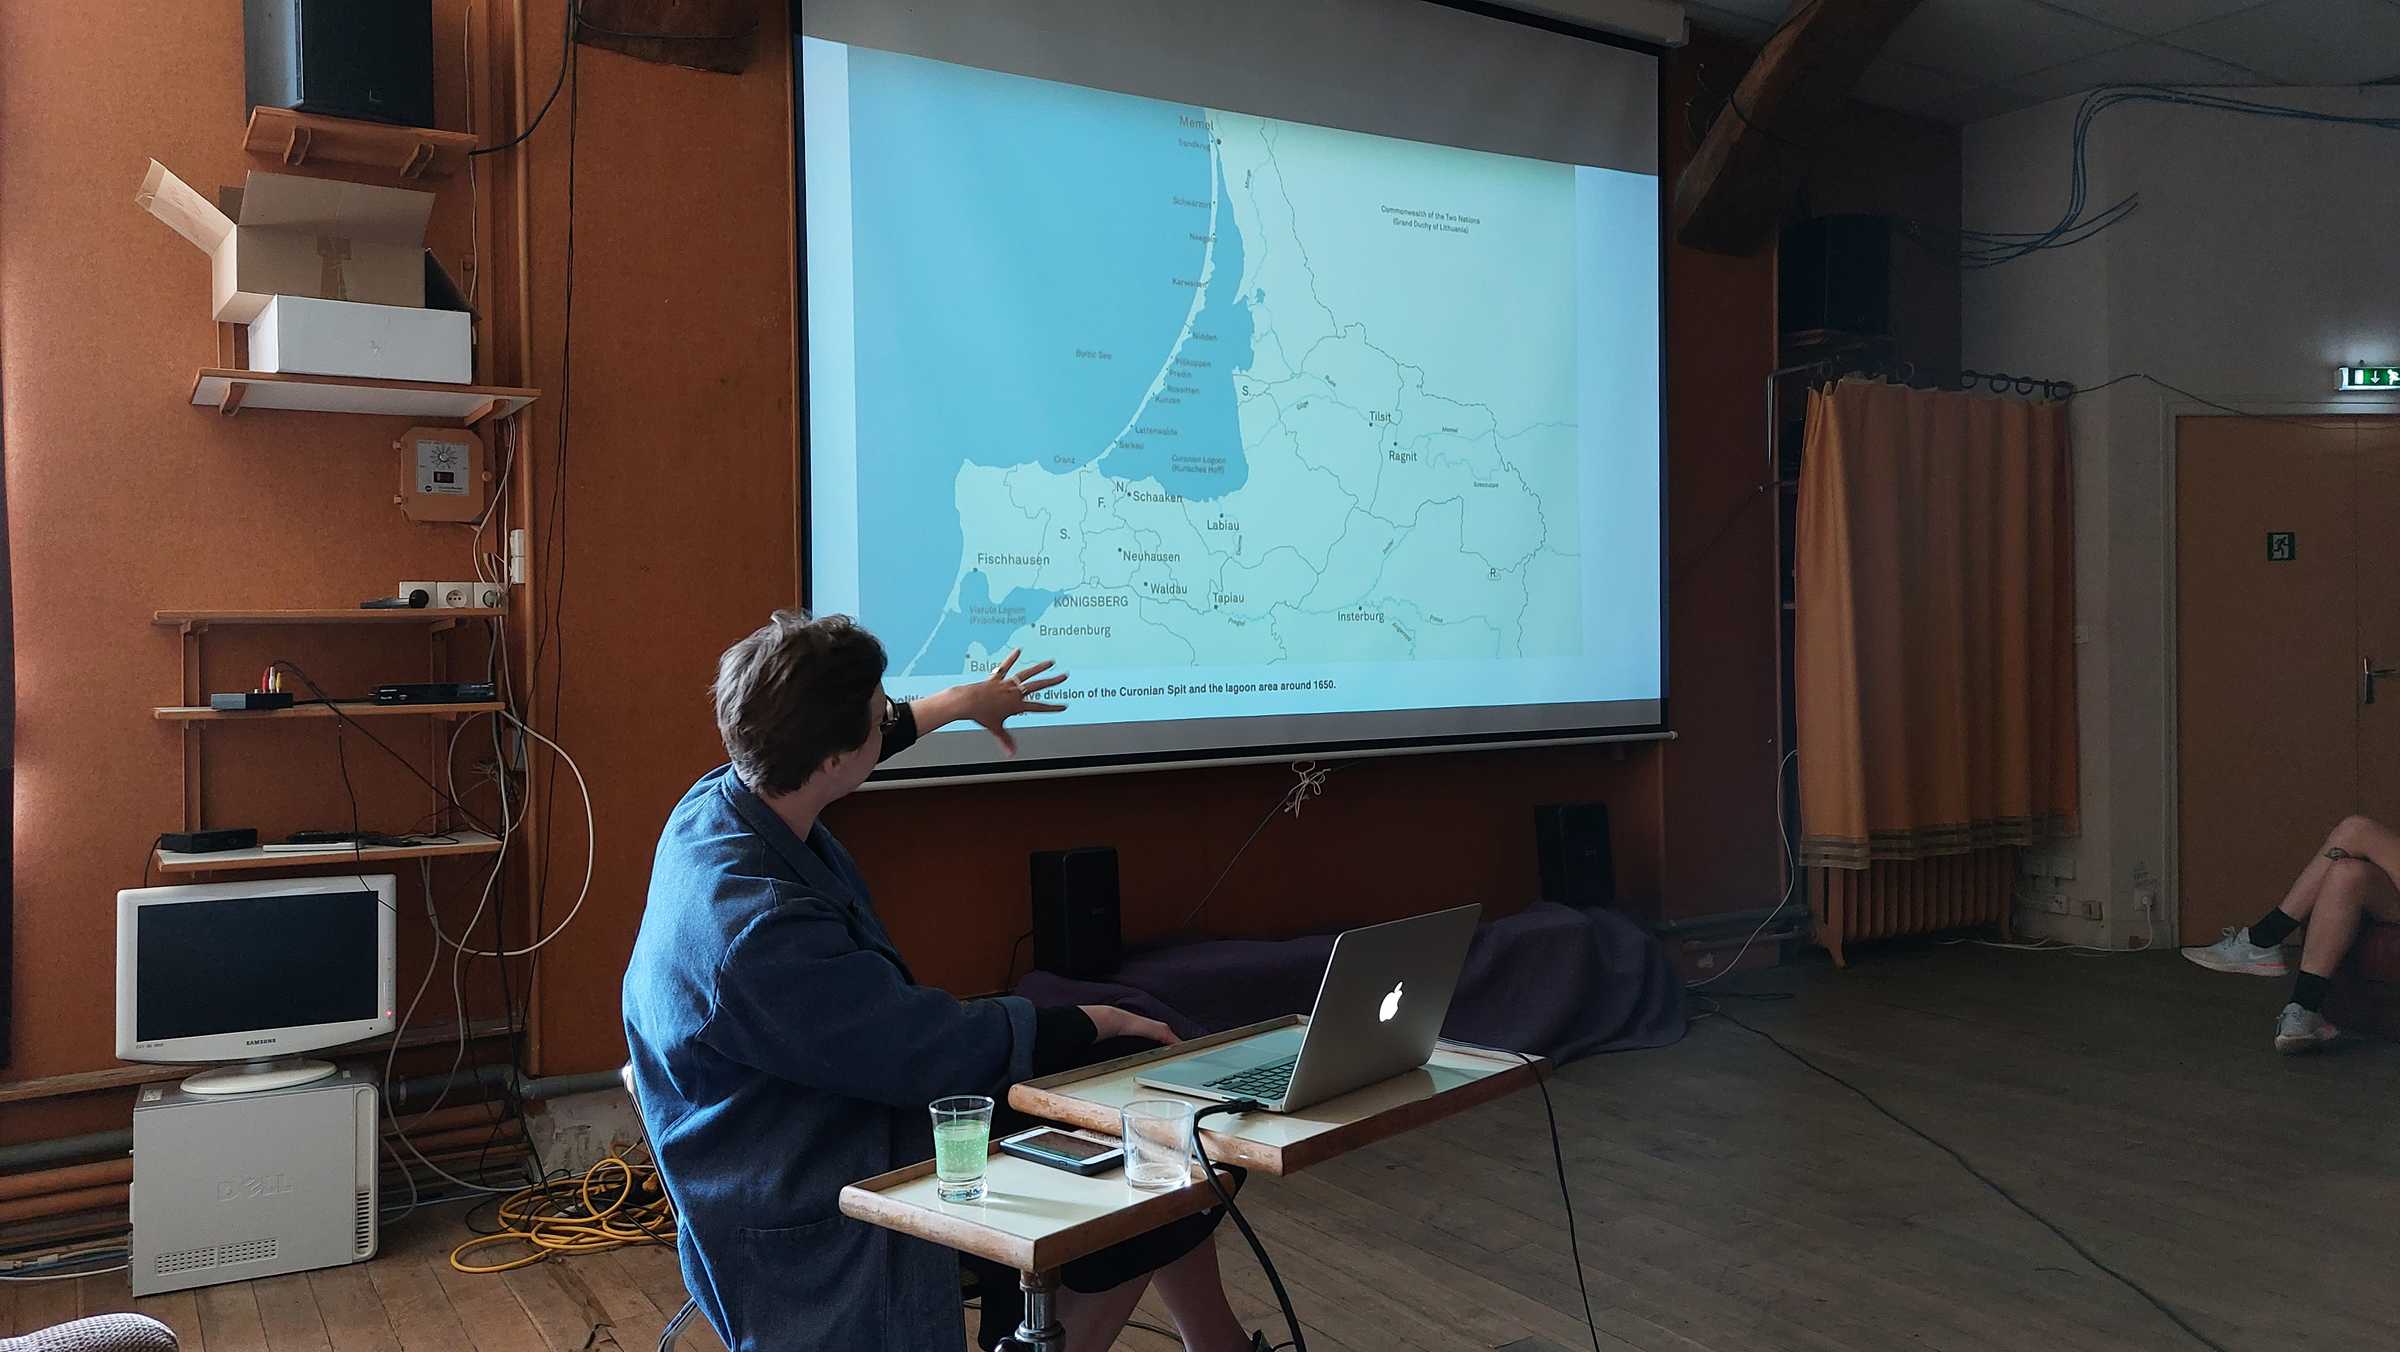  Egija Inzule introducing us to the Curonian Spit and the artistic research activities intiated by the NAC. June 7th 2021 @PAF. Photo credits: Nikos Doulos